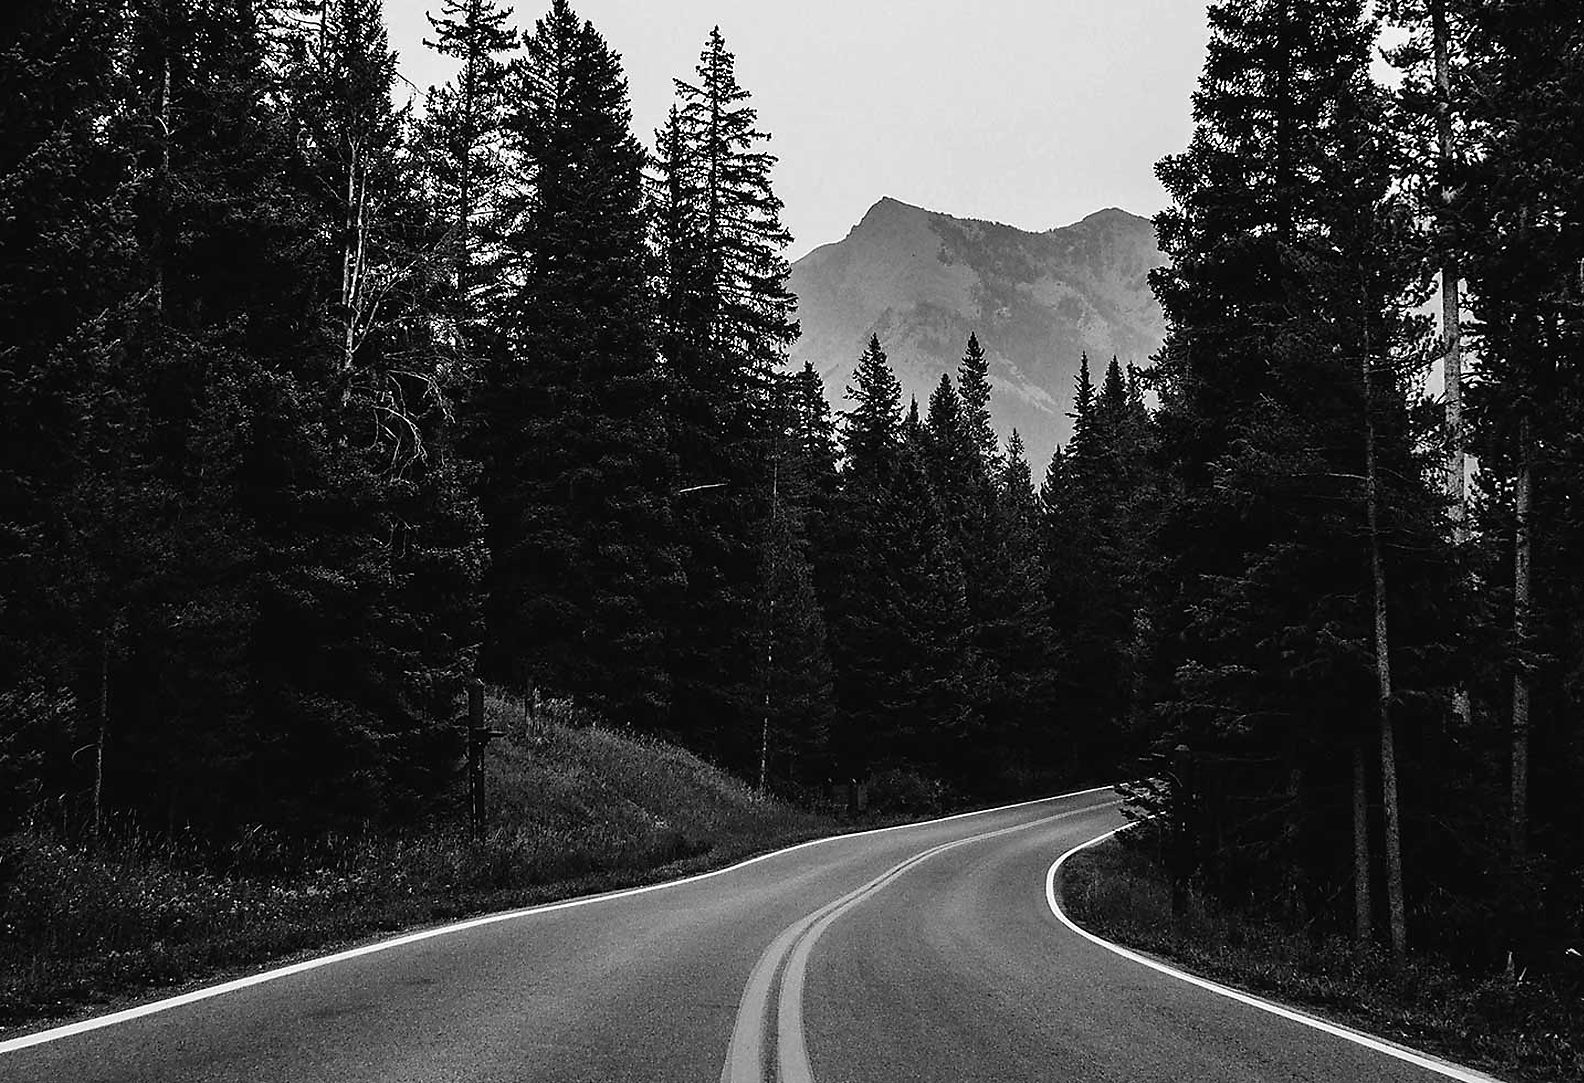 Black and white image of a curved road surrounded by trees with a mountain in the background